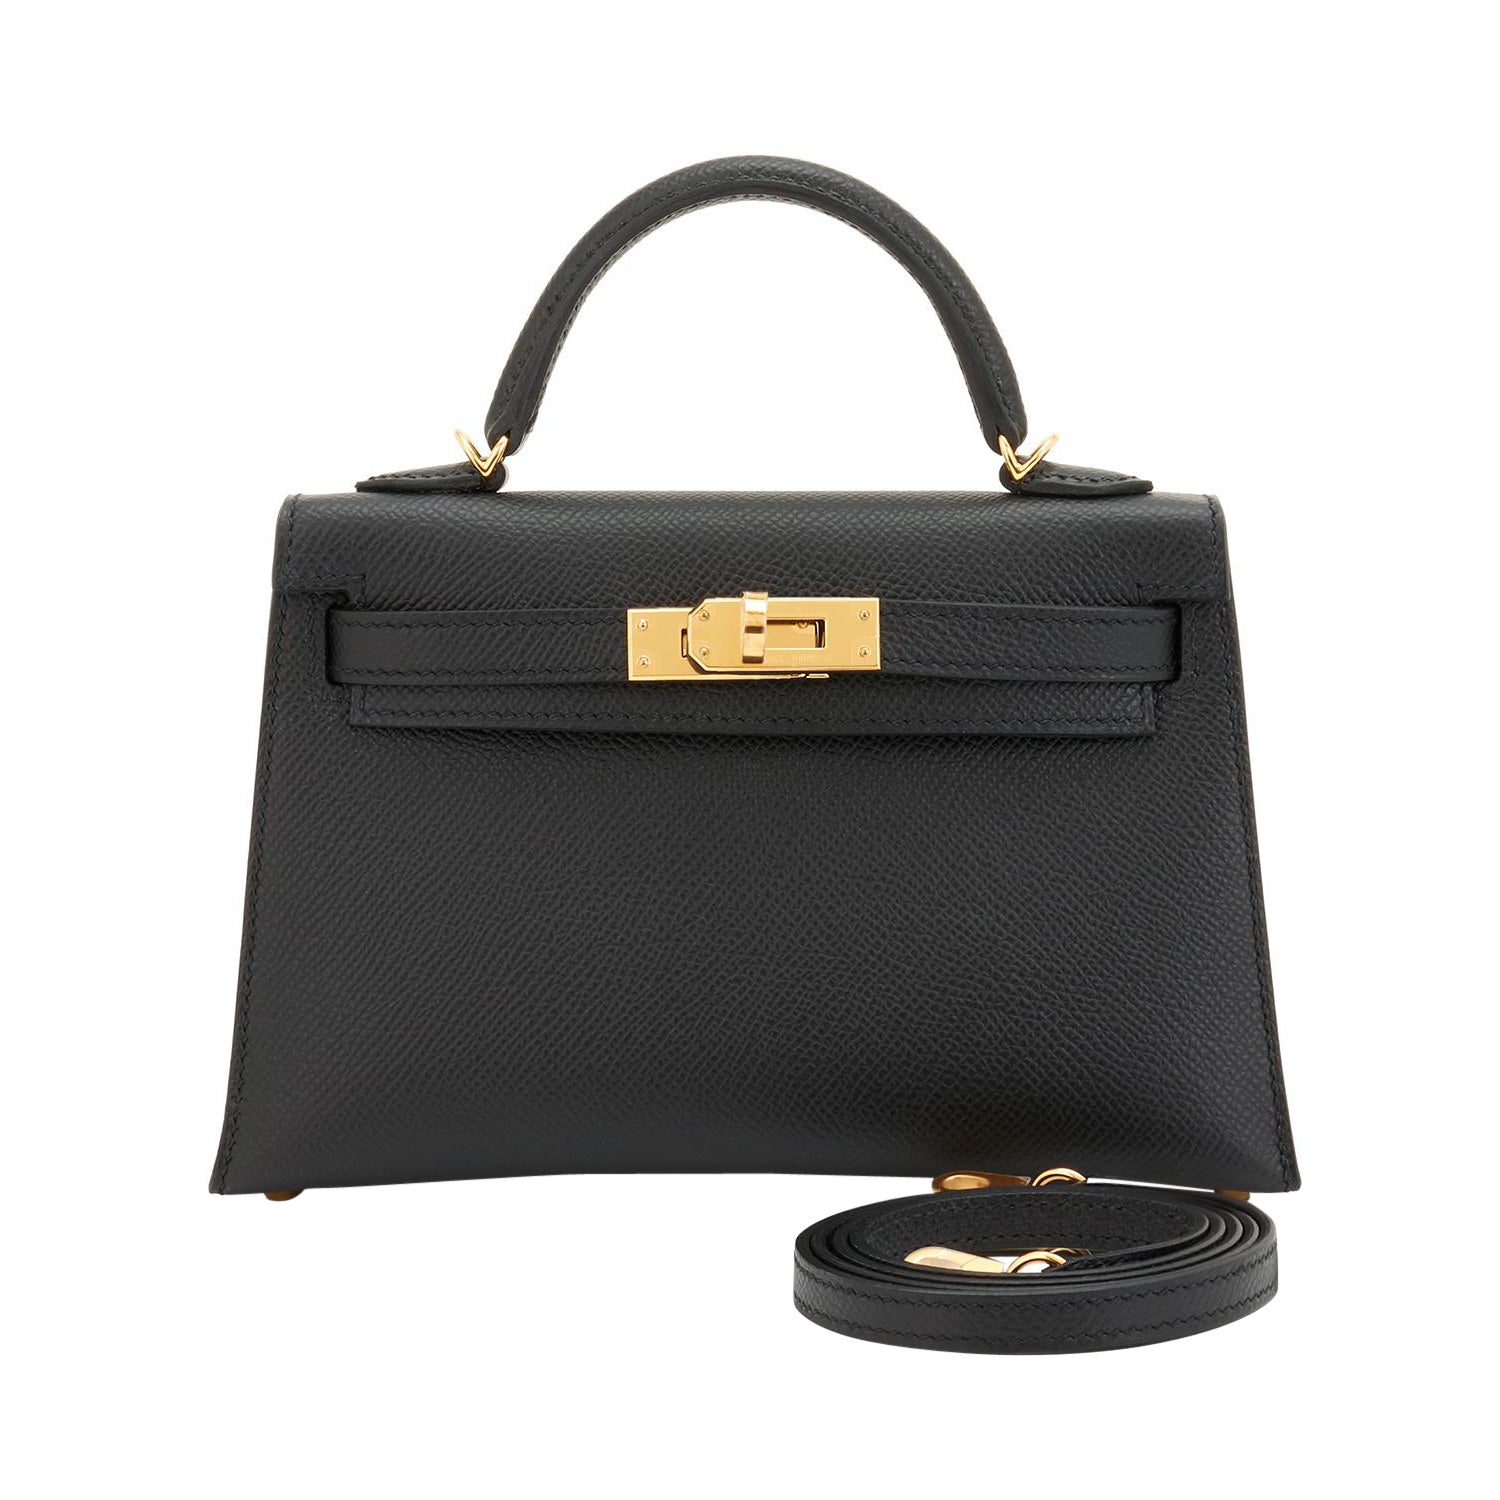 Hermes Mini Kelly 20cm Black VIP Epsom Gold Shoulder Bag, U Stamp, 2022
Just purchased from Hermes store; bag bears new 2022 U Stamp.
Brand New in Box.  Store Fresh. Pristine Condition (with plastic on hardware)
Perfect gift! Comes full set with